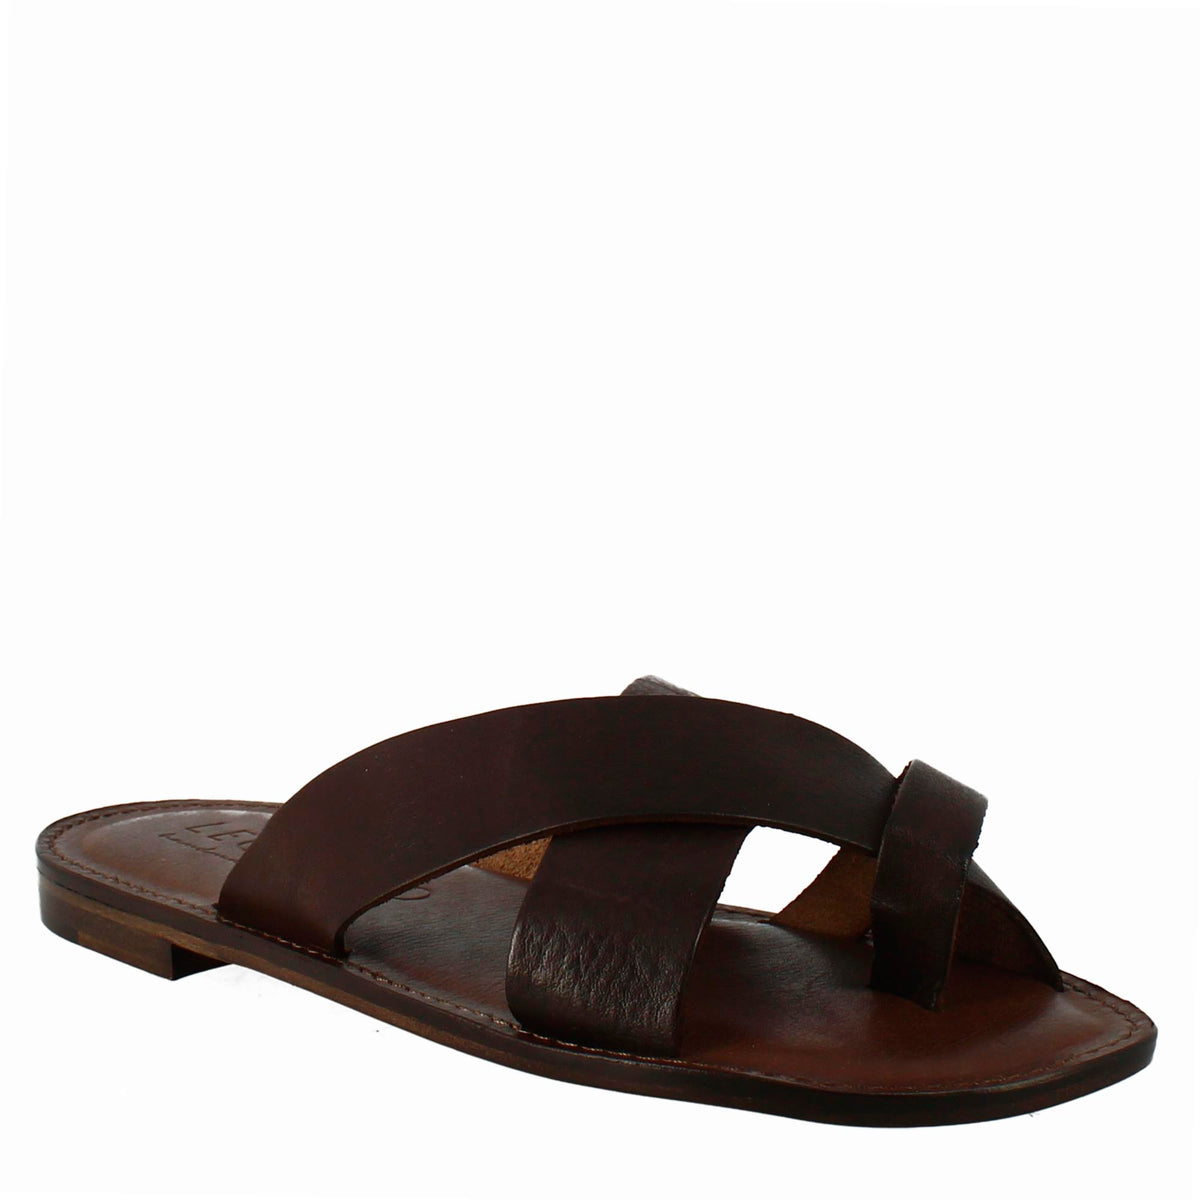 Coffee brown leather gladiator sandals for men 